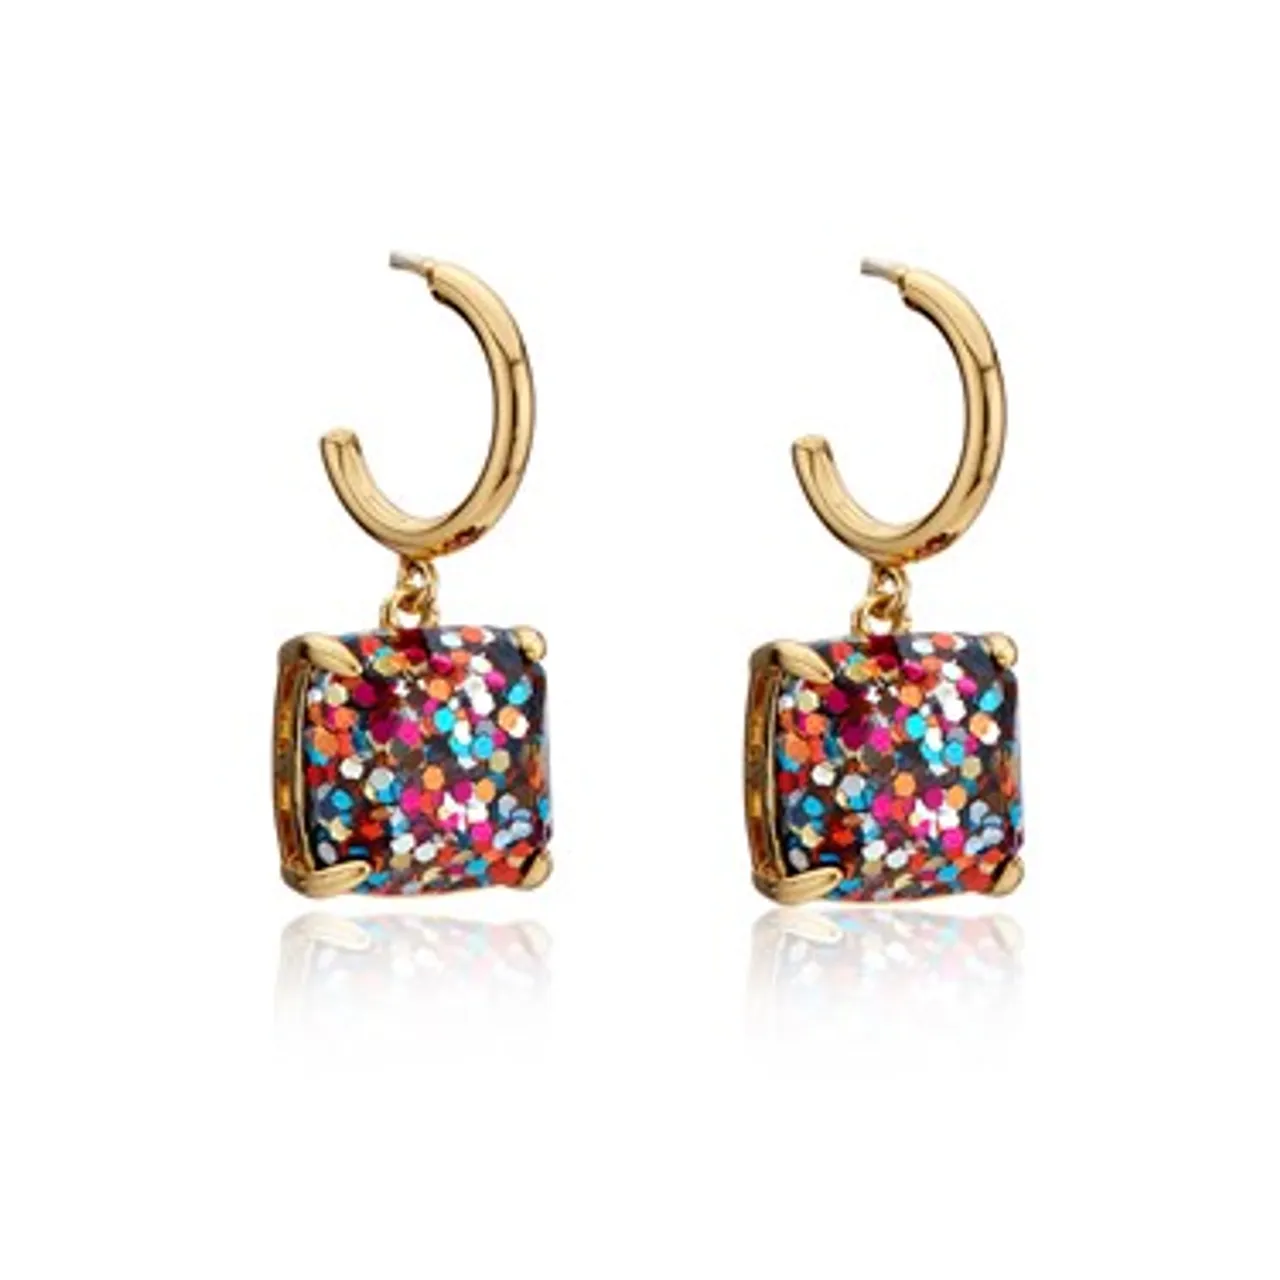 Kate Spade New York Mini Square Party Huggie Earrings - Gold